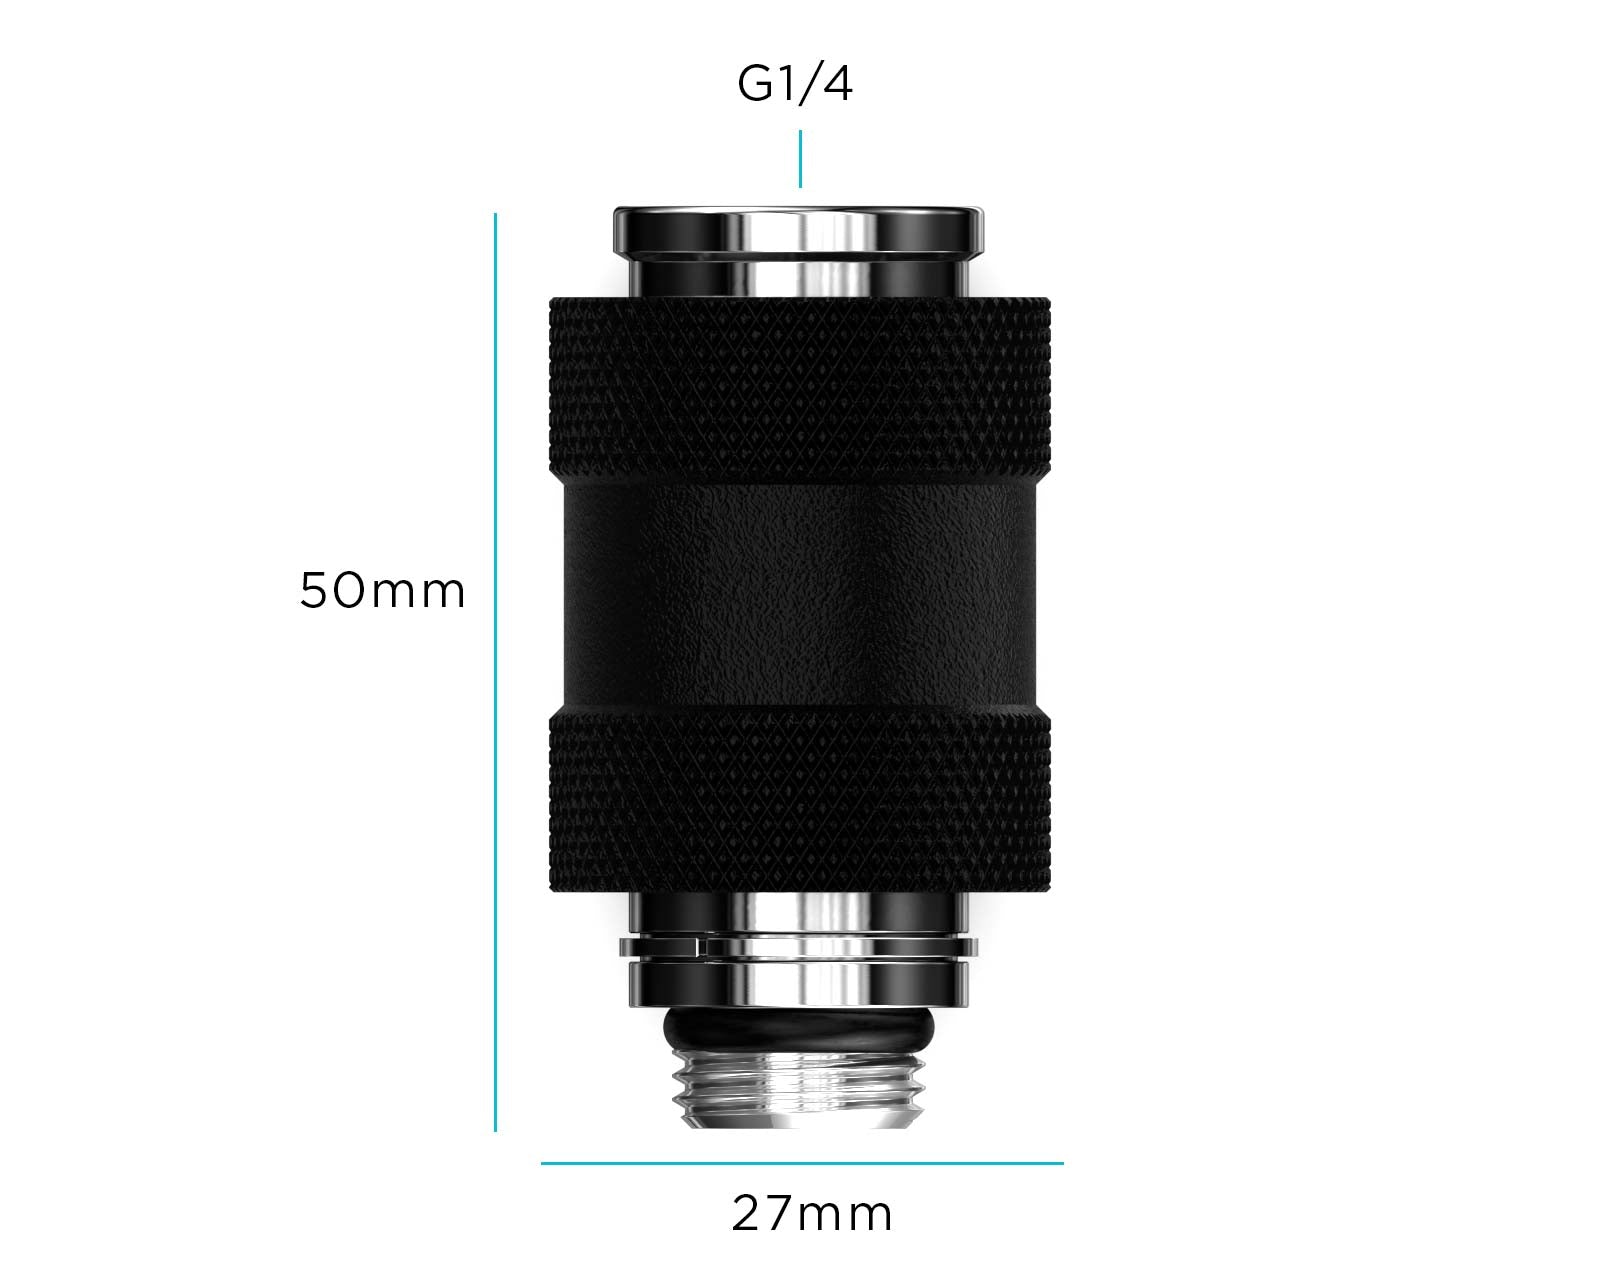 BSTOCK:PrimoChill Male to Female G 1/4 SX Pull Drain Valve - Copper Candy - PrimoChill - KEEPING IT COOL